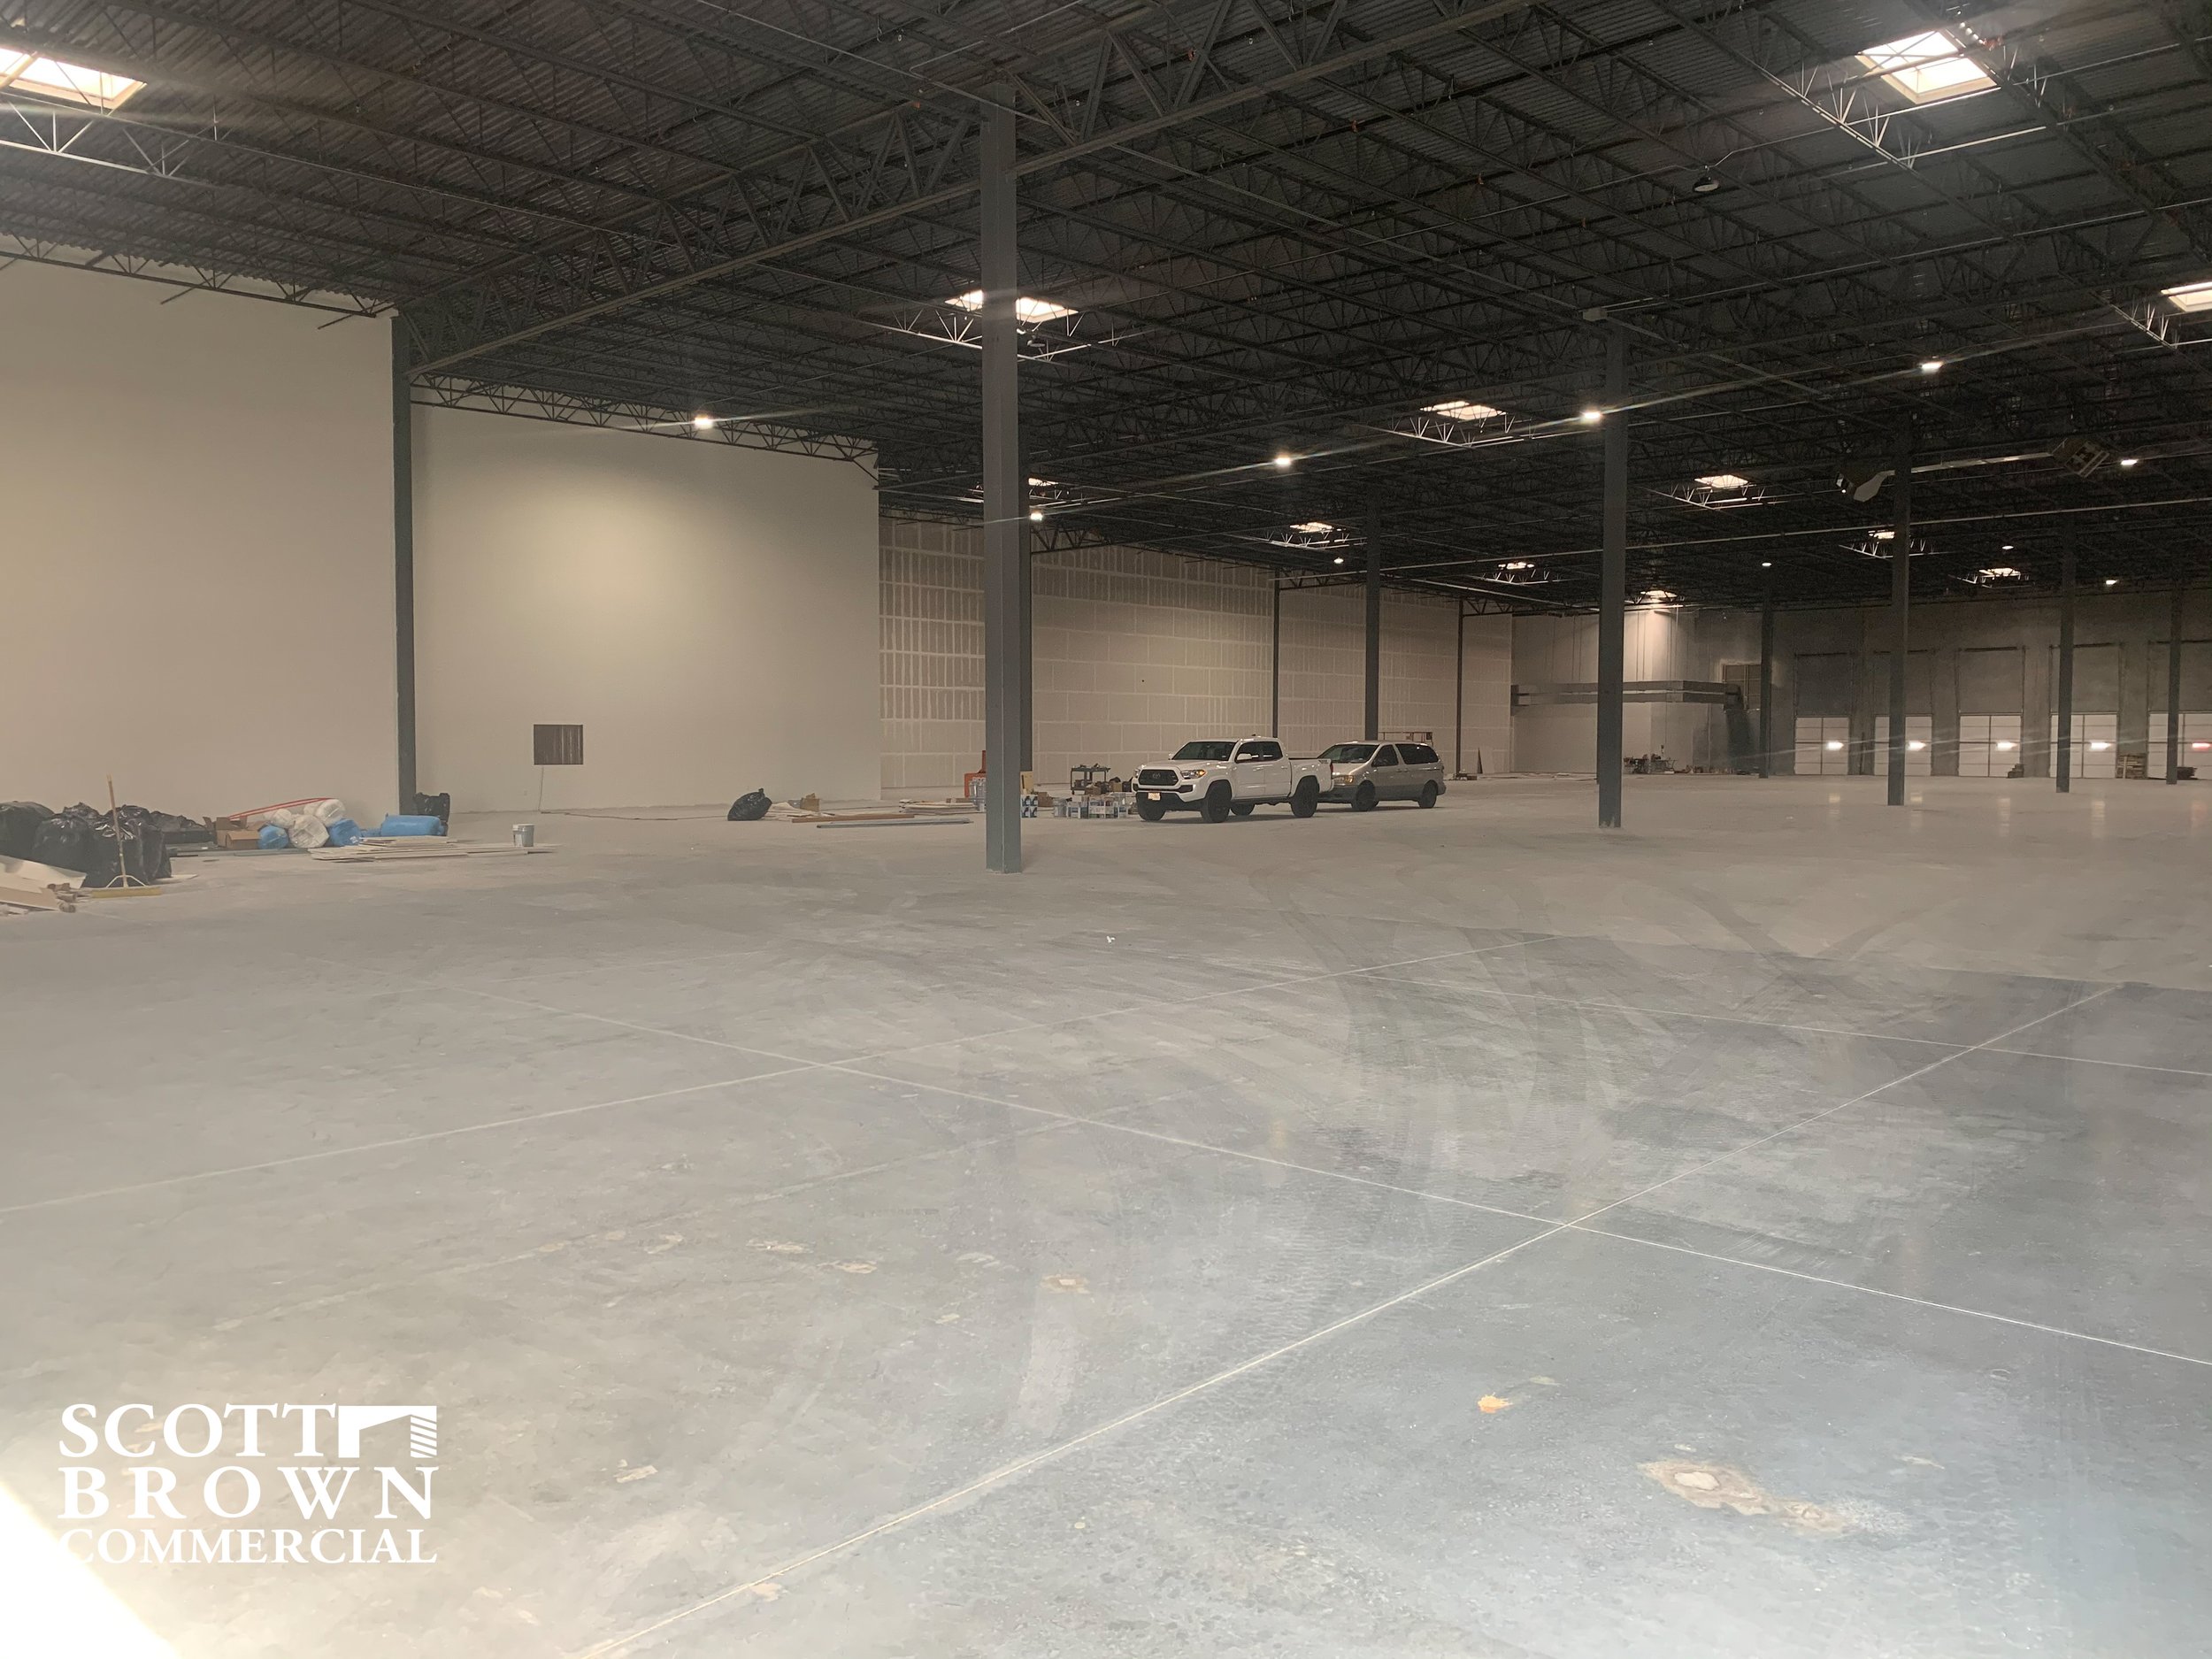  inside 1550 N Western Blvd with concrete floors and a couple pickup trucks 